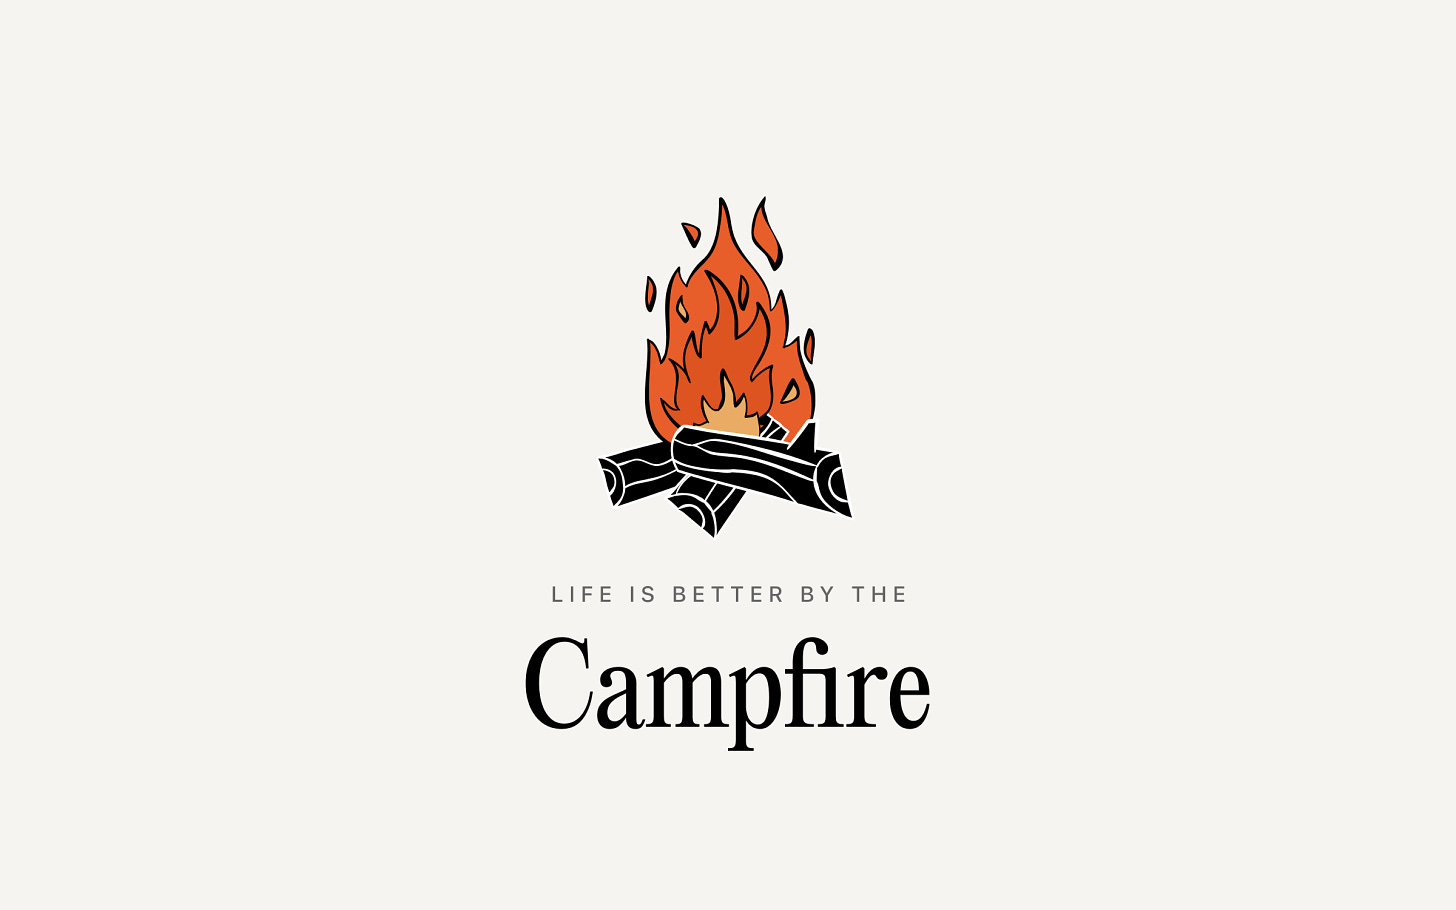 Campfire 28: How to show your clients you’re an expert designer without saying it?